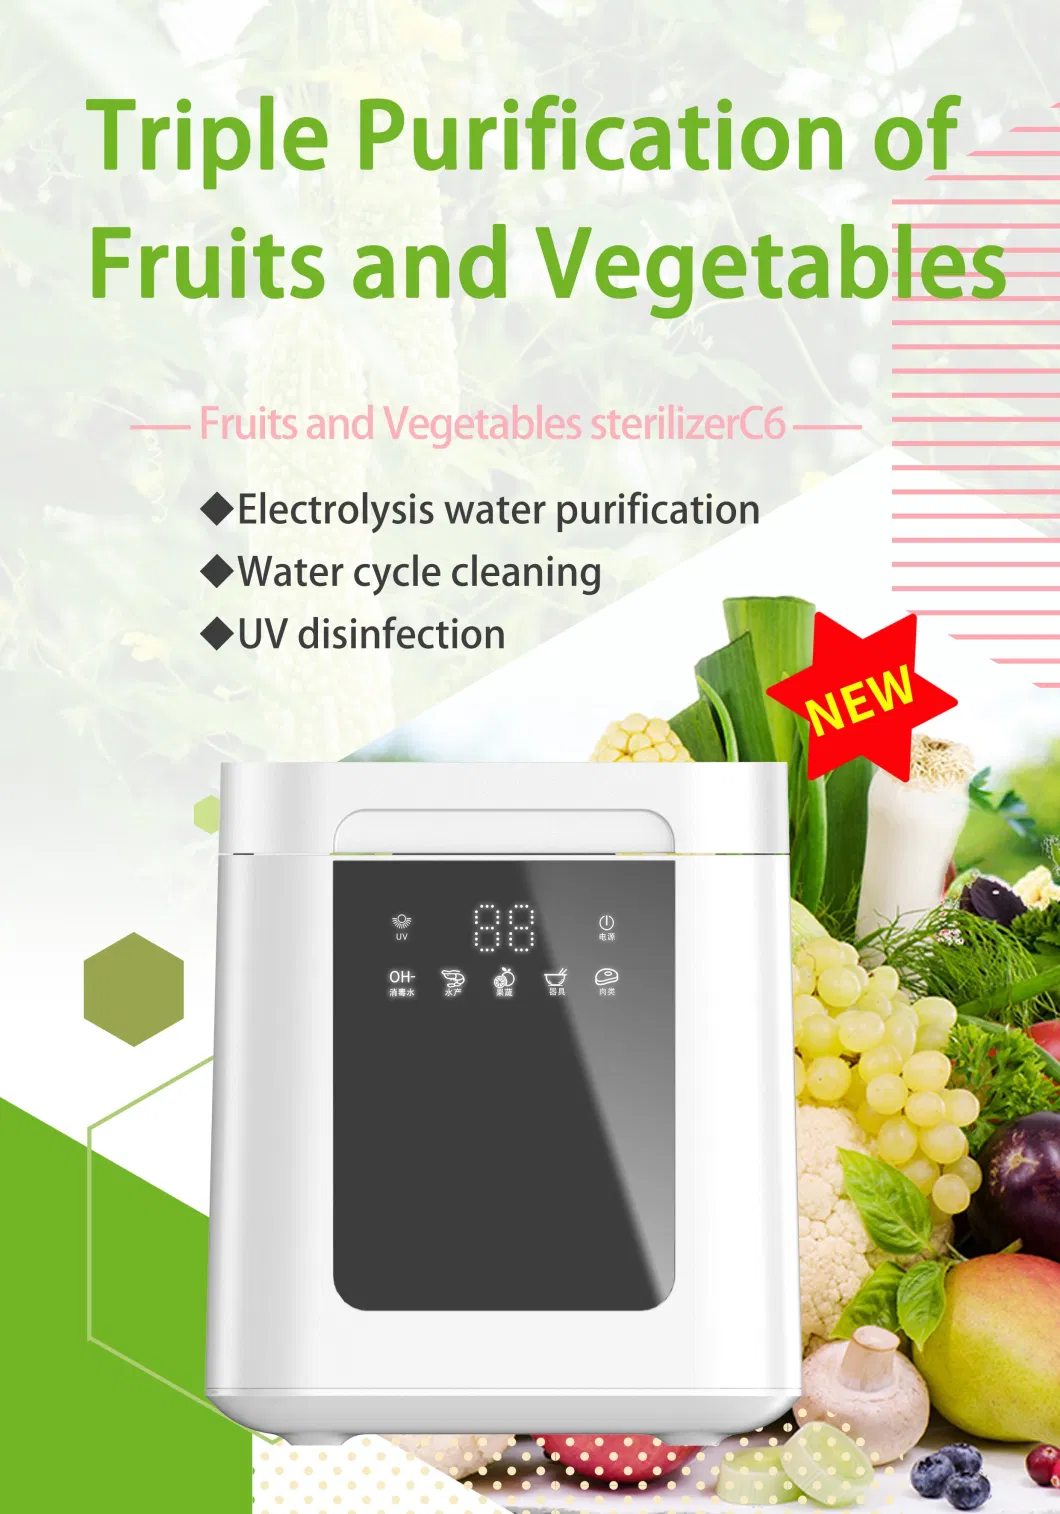 Family Use Healthcare Small Appliance Food Washer Washing Machine Fruit and Vegetable Sterilizer for Home